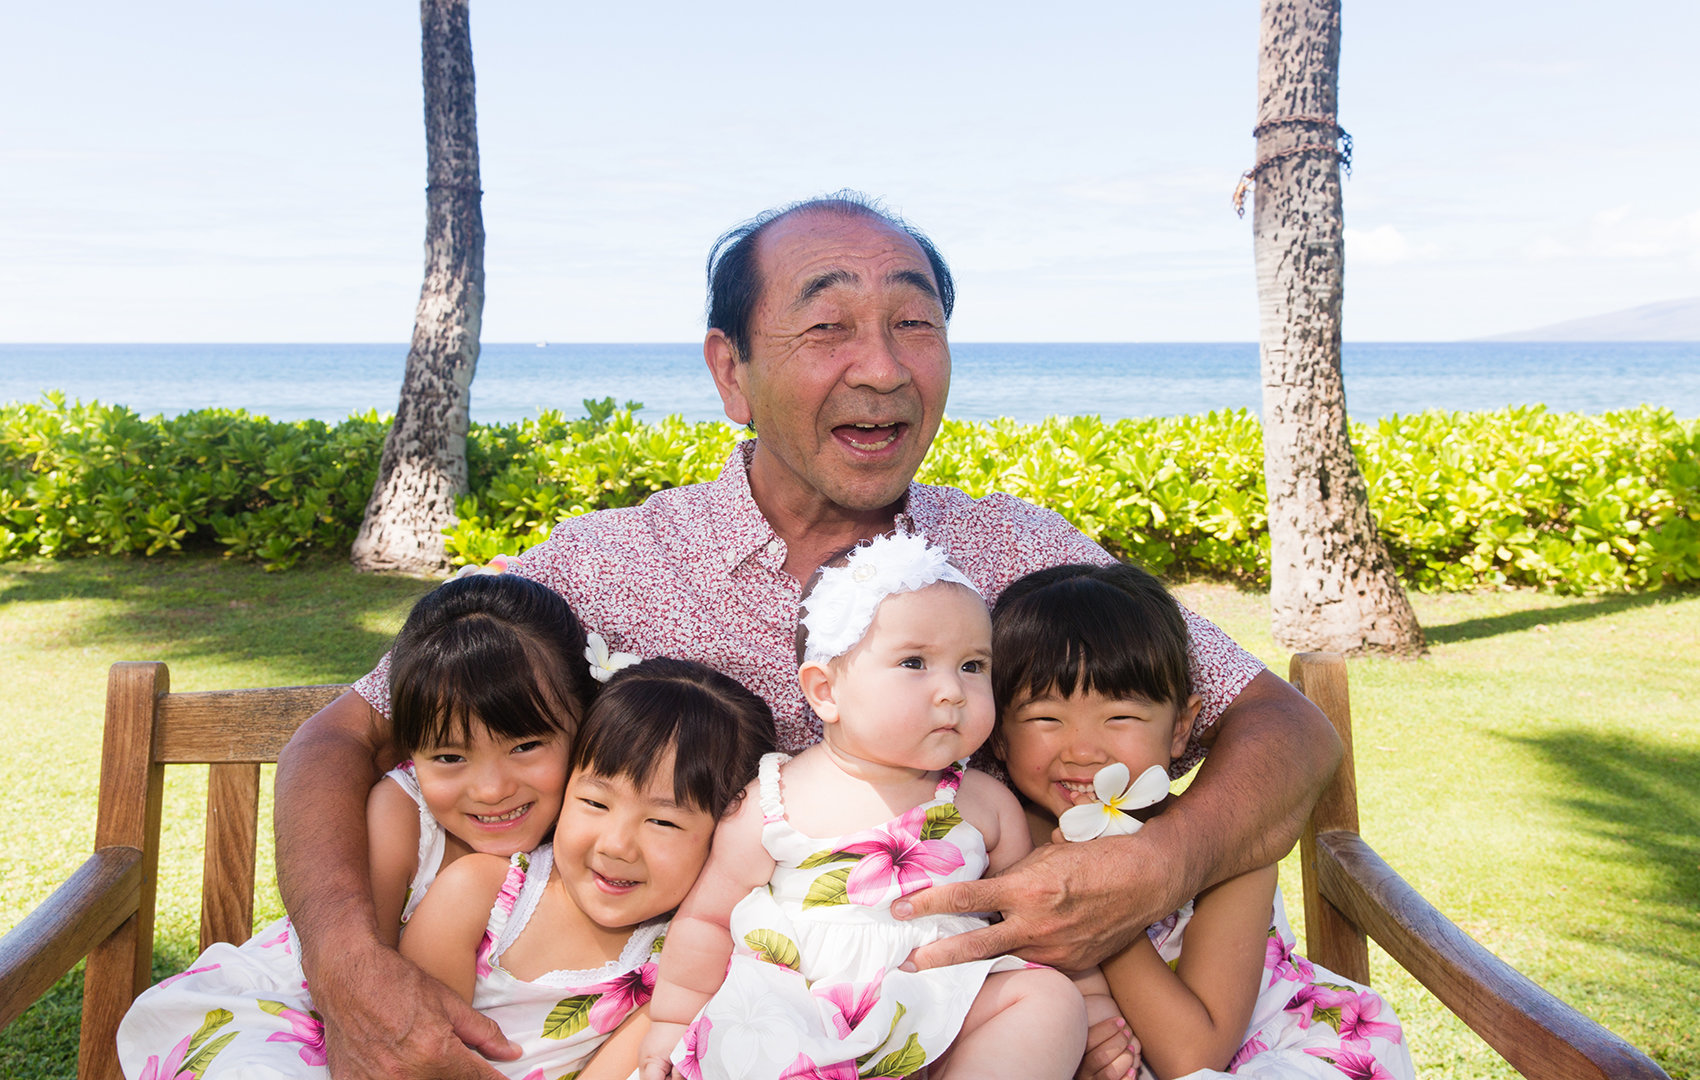 grandpa and his grandkids photography package.